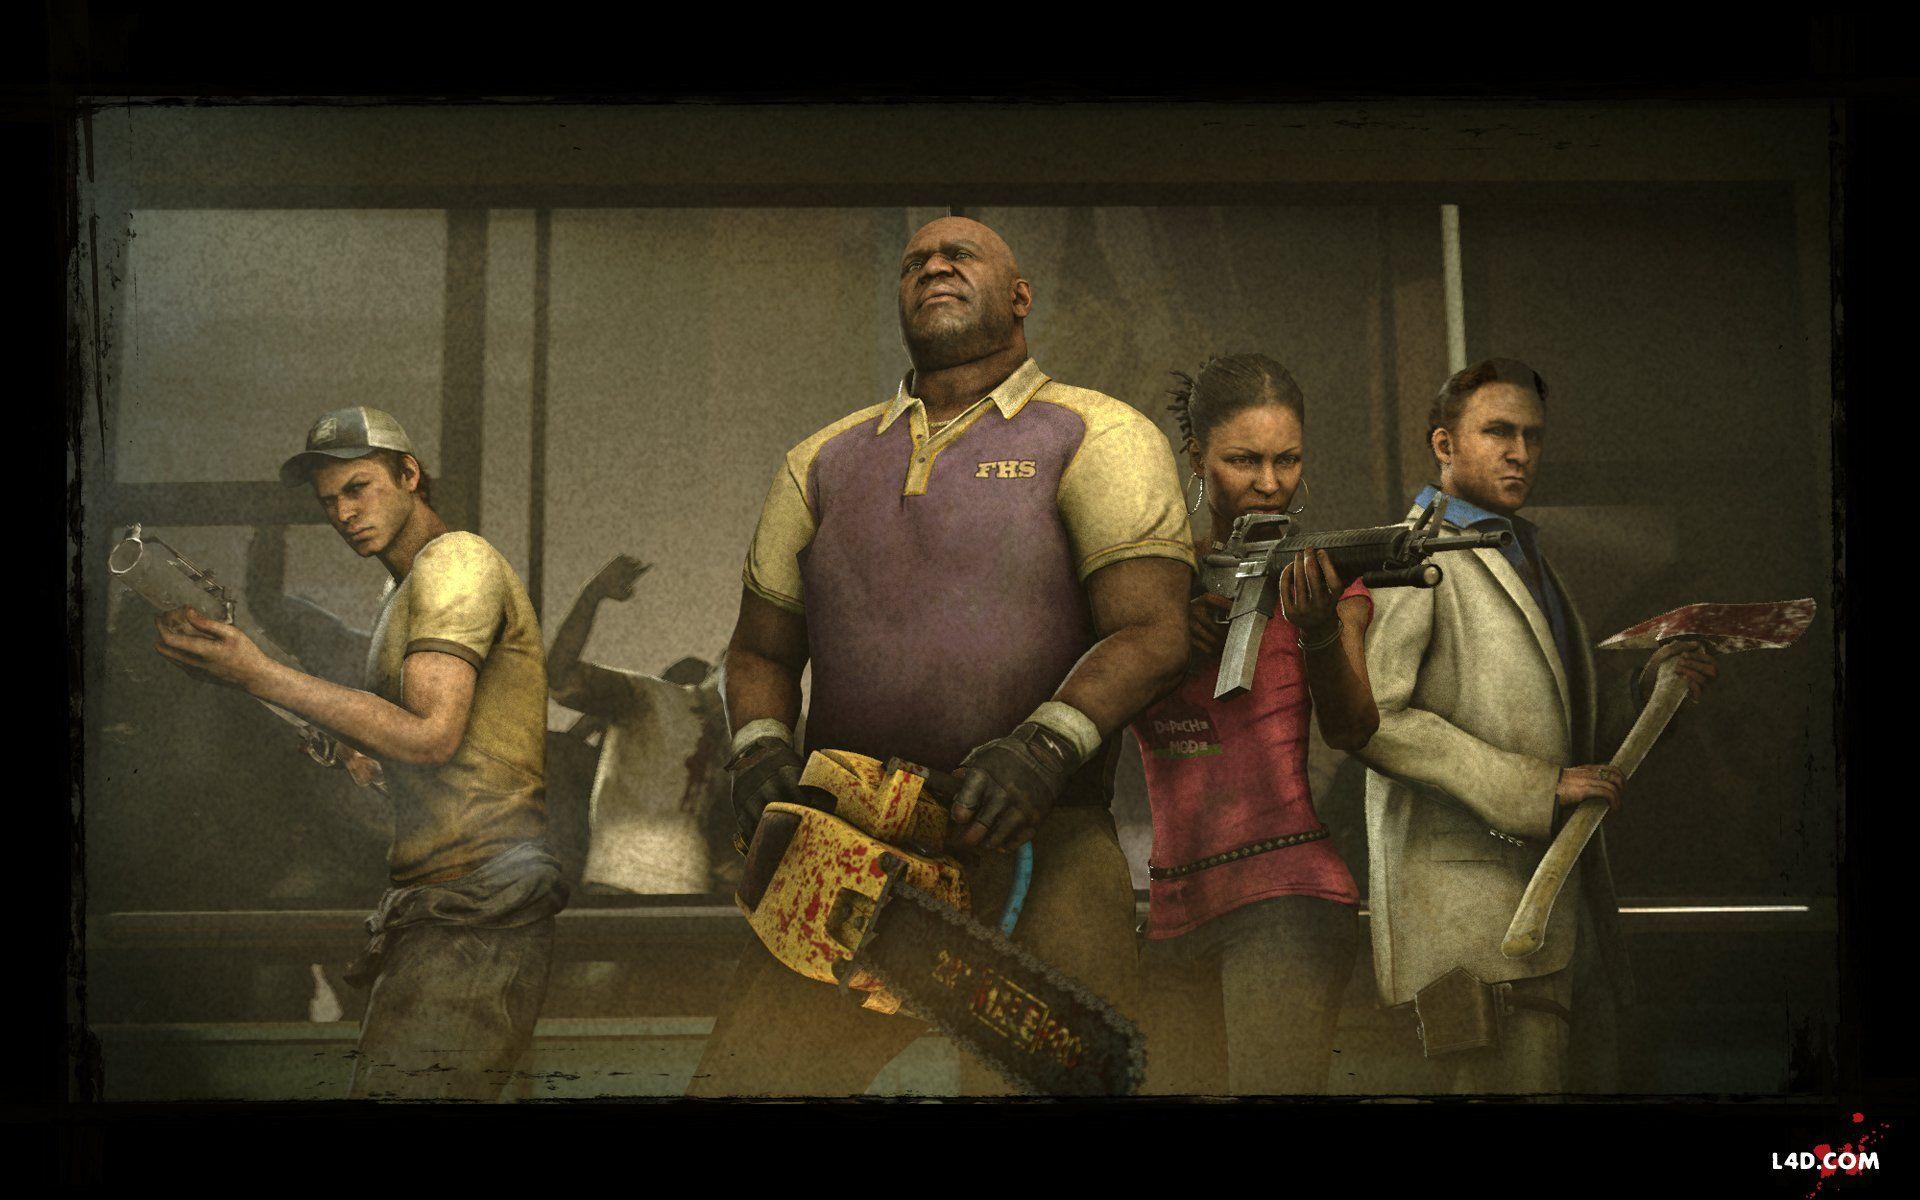 Left 4 Dead HD Wallpaper and Background Image